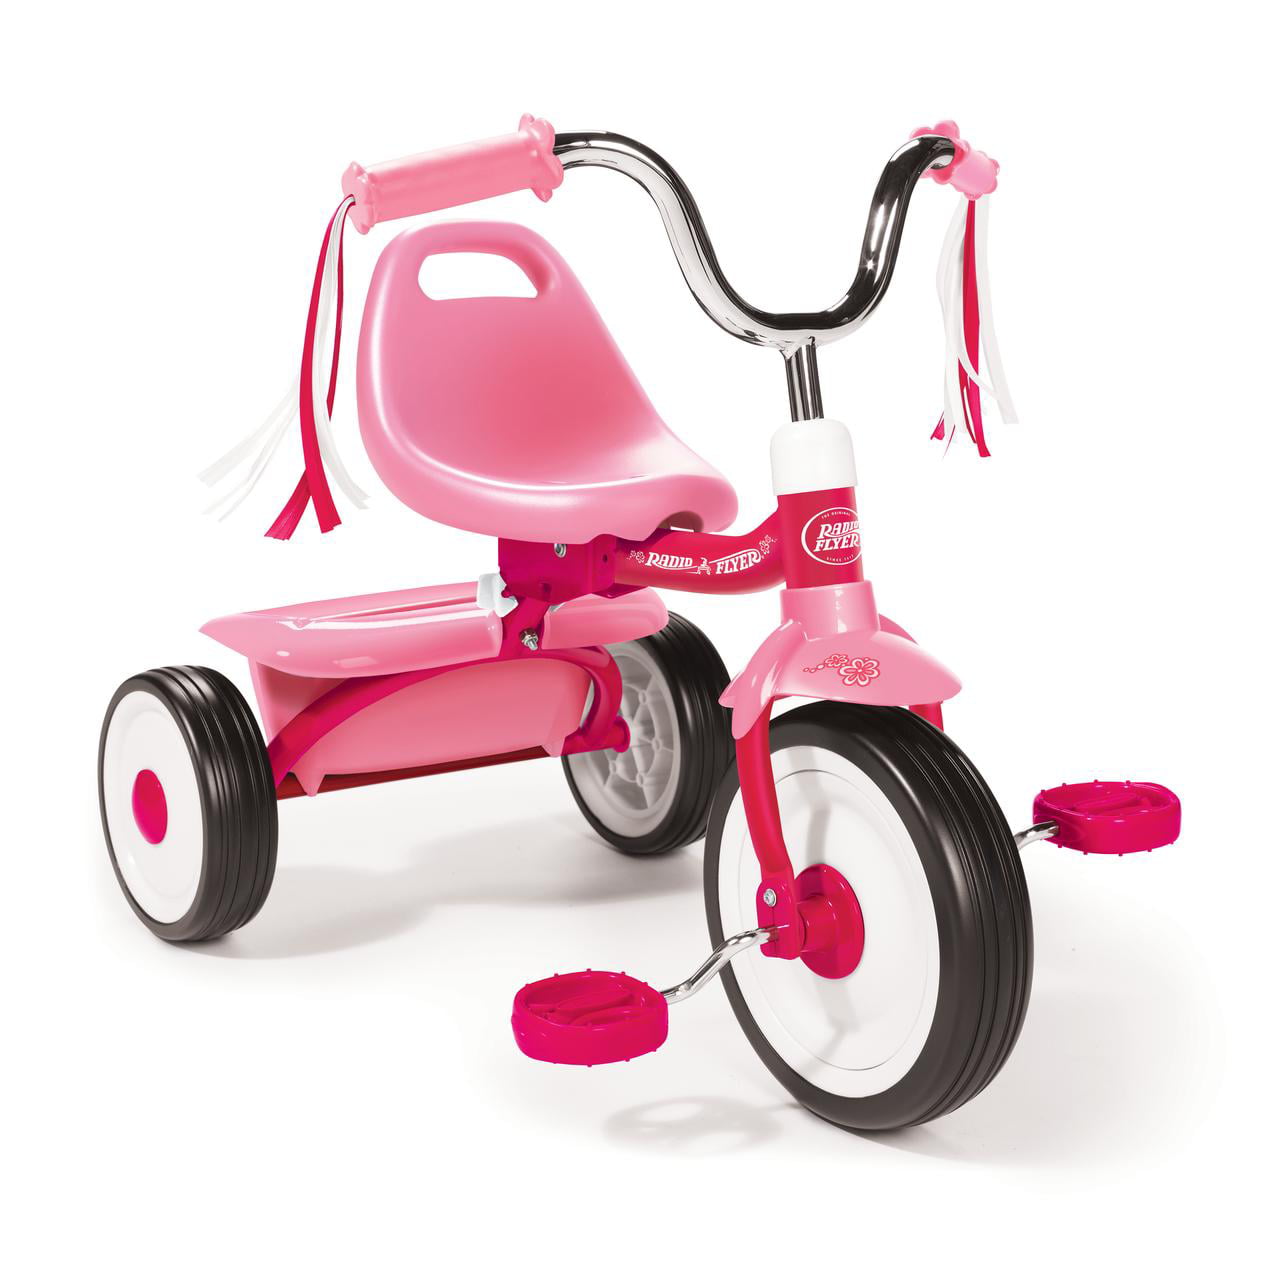 Radio Flyer, Ready to Ride Folding Trike, Fully Assembled, Pink, Beginner Tricycle for Kids - 1